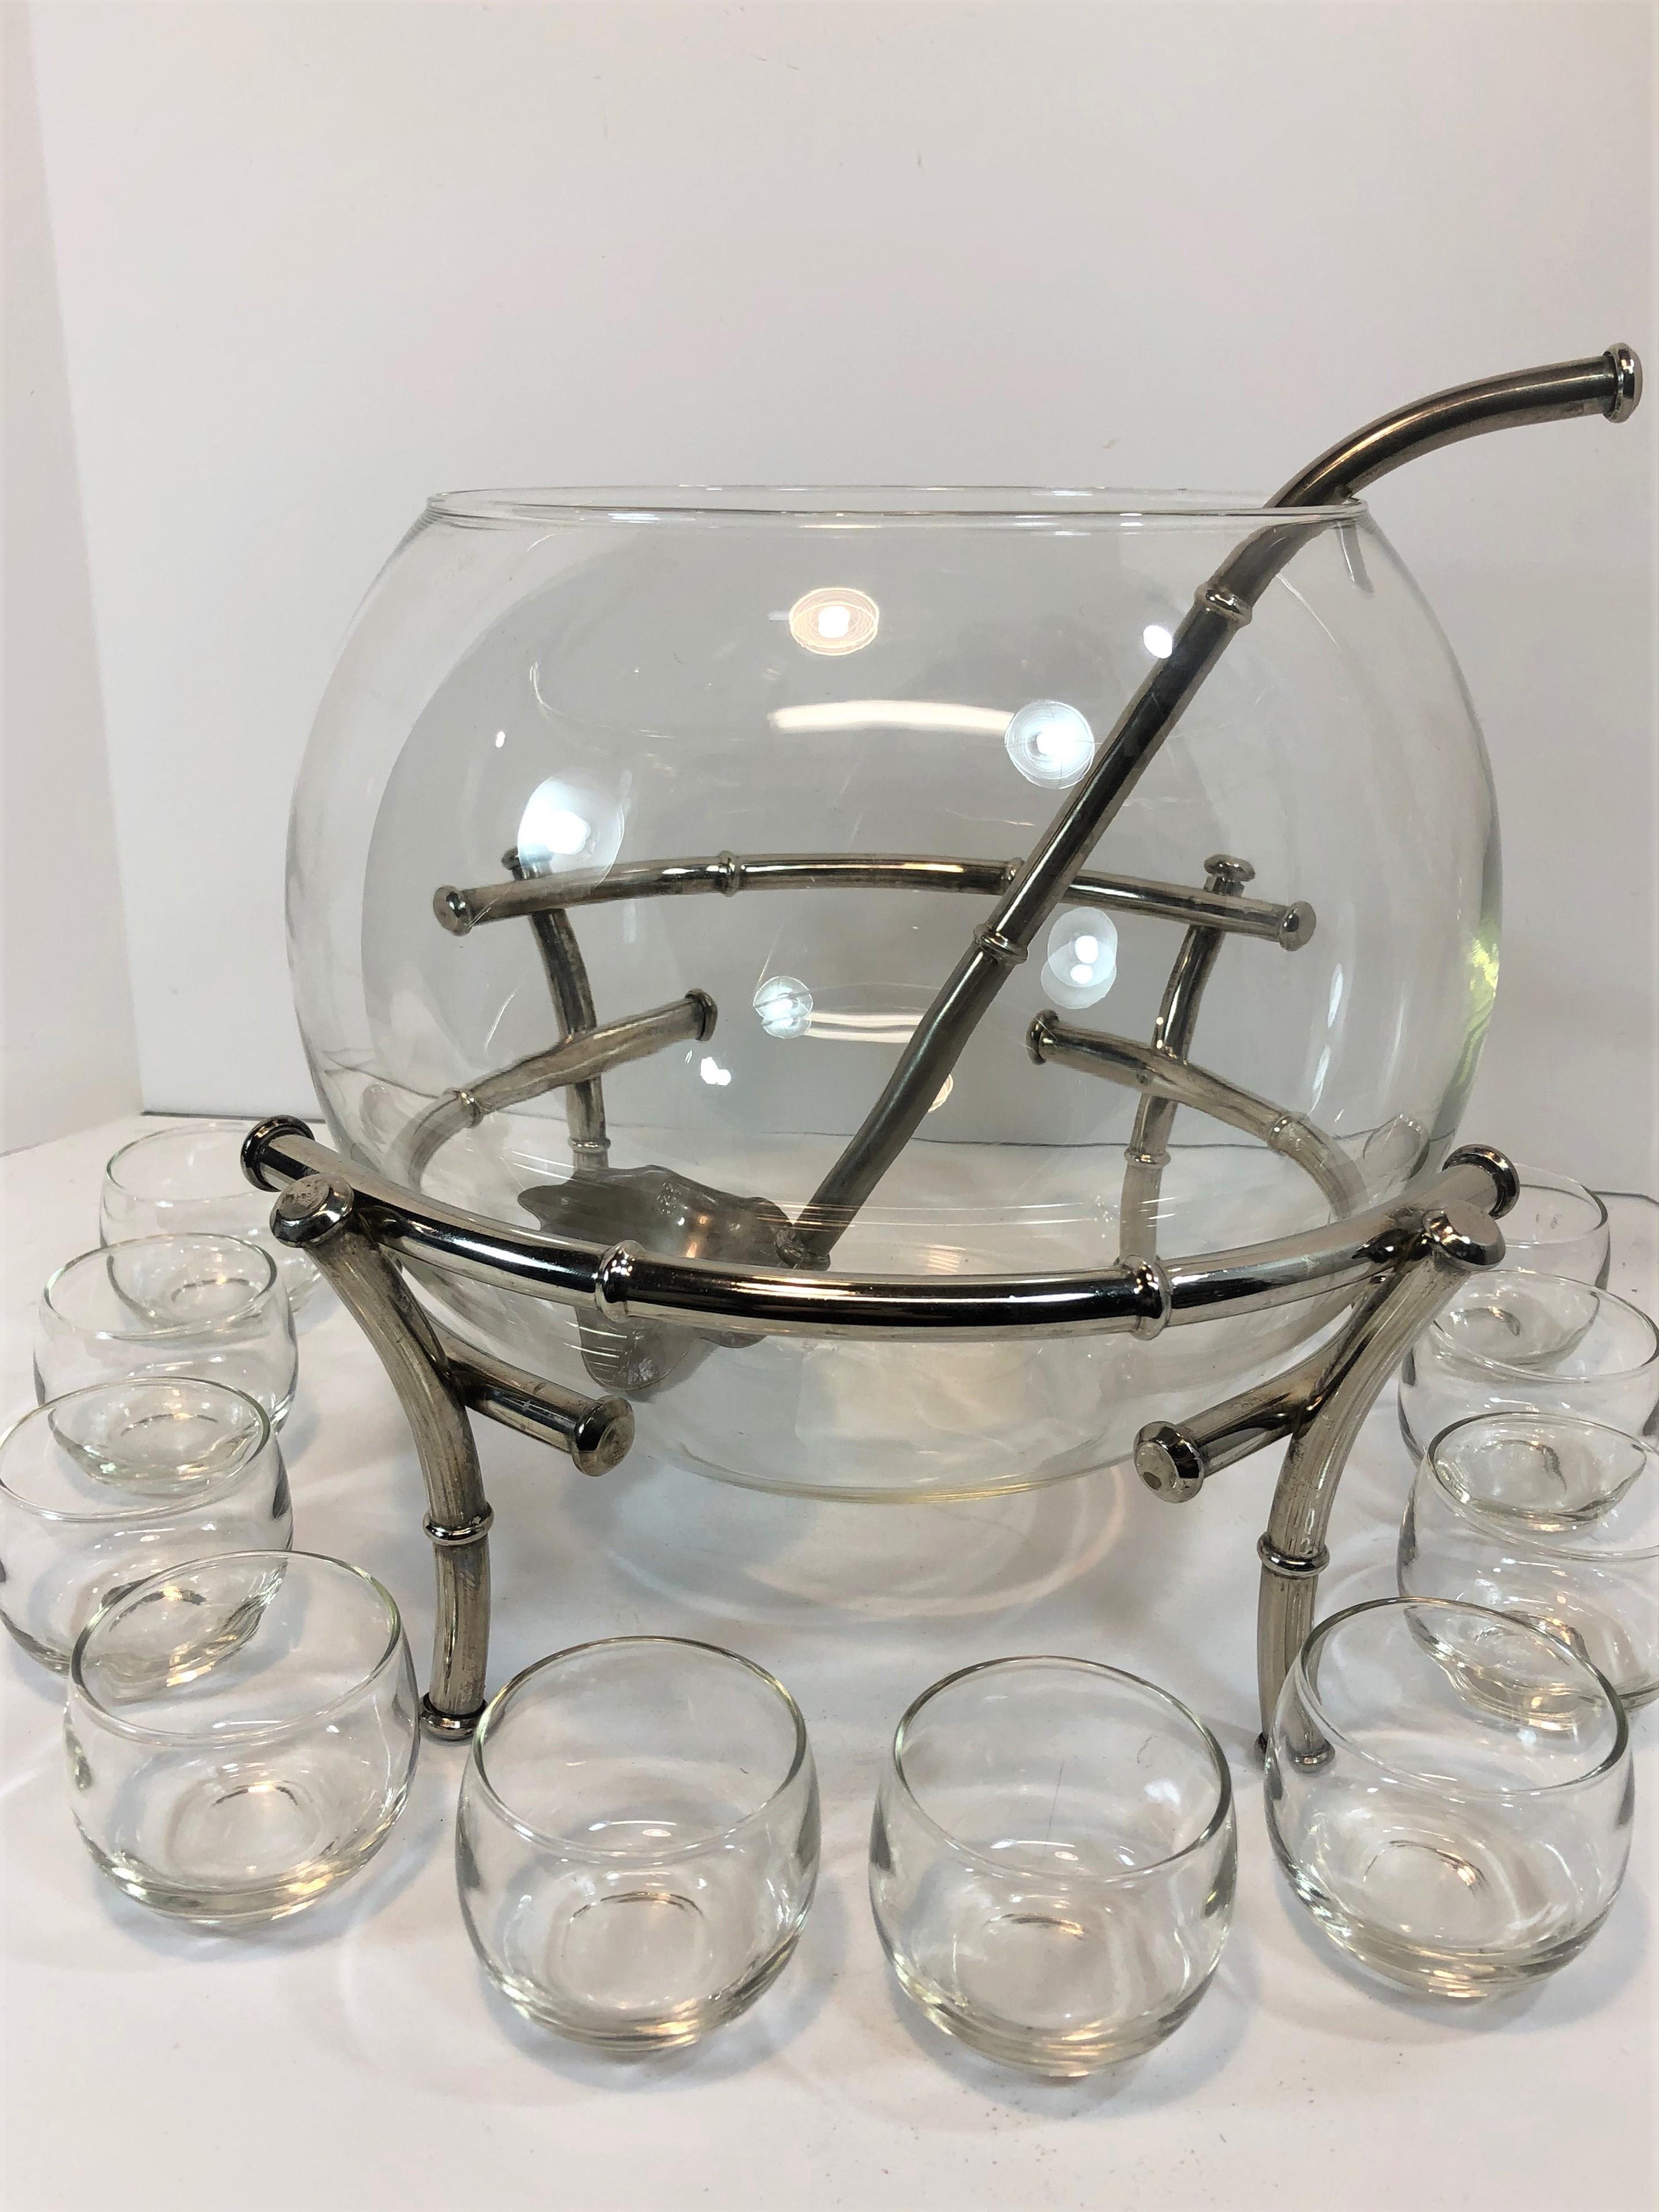 Faux bamboo silver plate punch set with ladle and ten cups. Punch bowl and cups are made of CLEAR glass and in great condition. Set looks to be unused or hardly used.